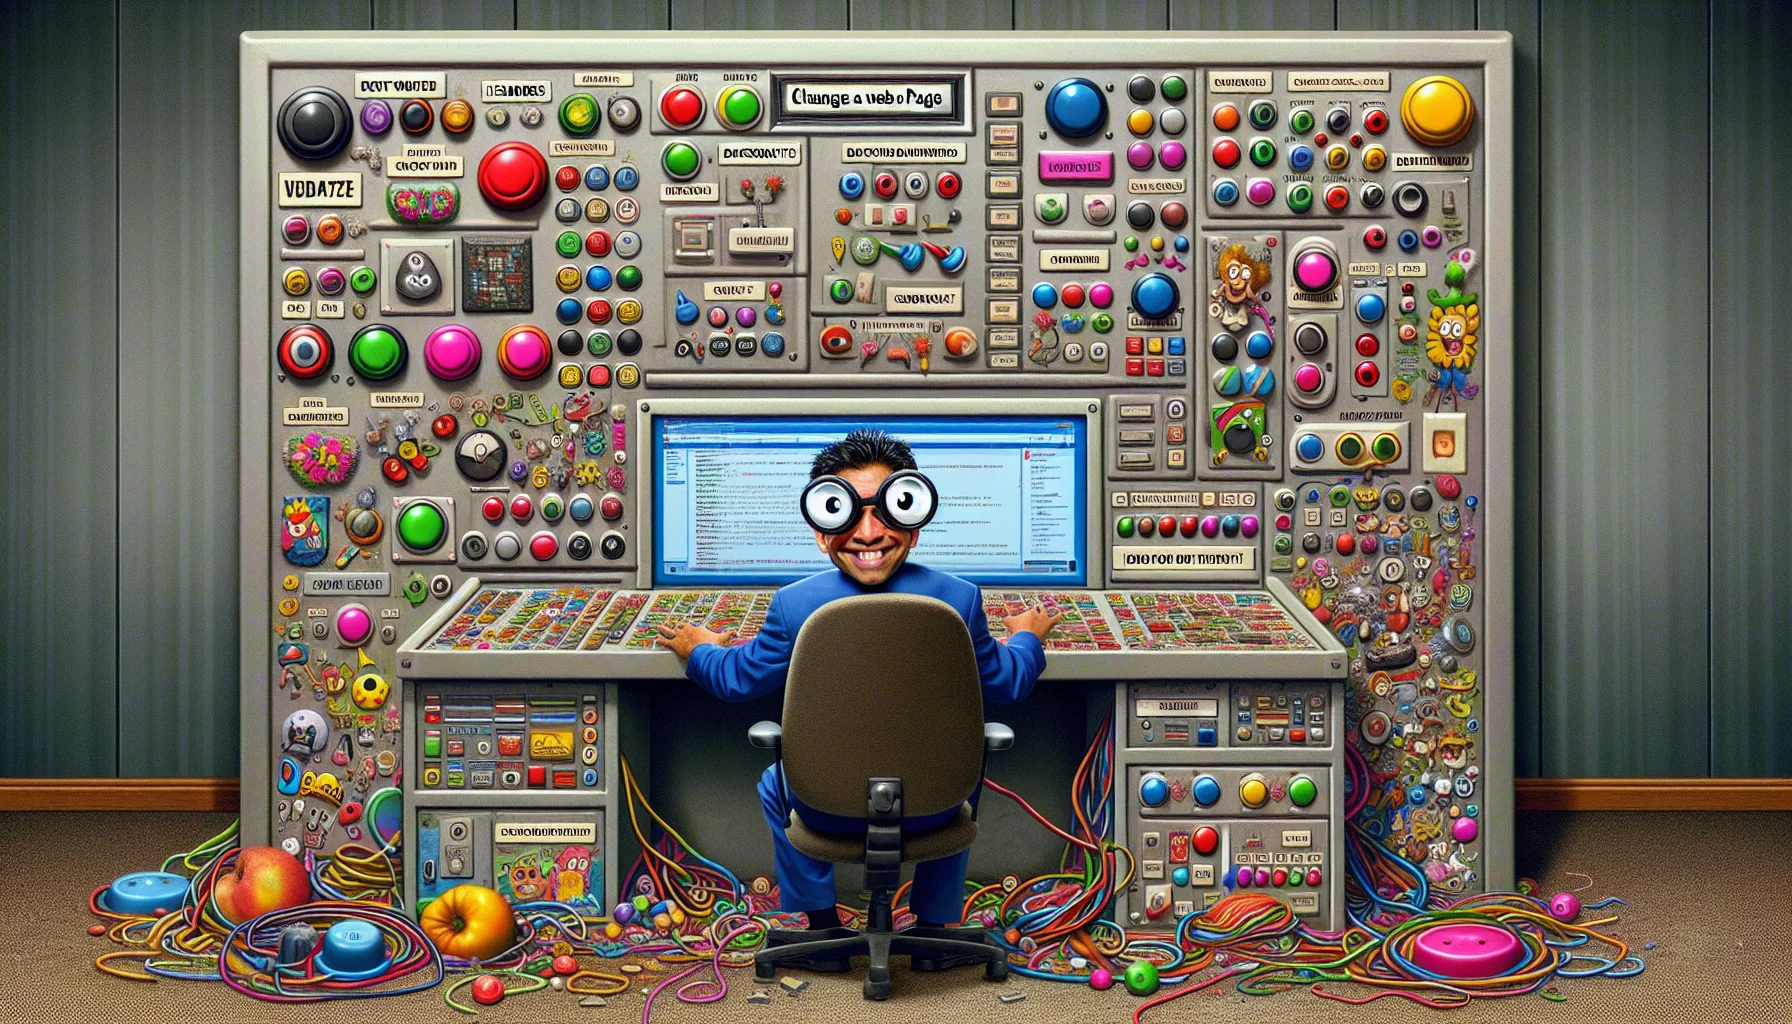 Create a humorous image featuring the process of changing a web page template. Picture a mischievous South Asian male coder in front of a gigantic, slightly overwhelming control panel filled with a myriad of colorful knobs and switches labeled with wacky webpage elements (e.g., headers, footers, backgrounds, widgets). Next to the panel, there's a large screen displaying a hodgepodge website full of mismatched elements reflecting the coder’s chaotic but creative process. Further enhance the scene with a pair of cartoon-like glasses resting on his head, symbolizing precision and attention to detail, suggesting the idea of web hosting in a lighthearted way.